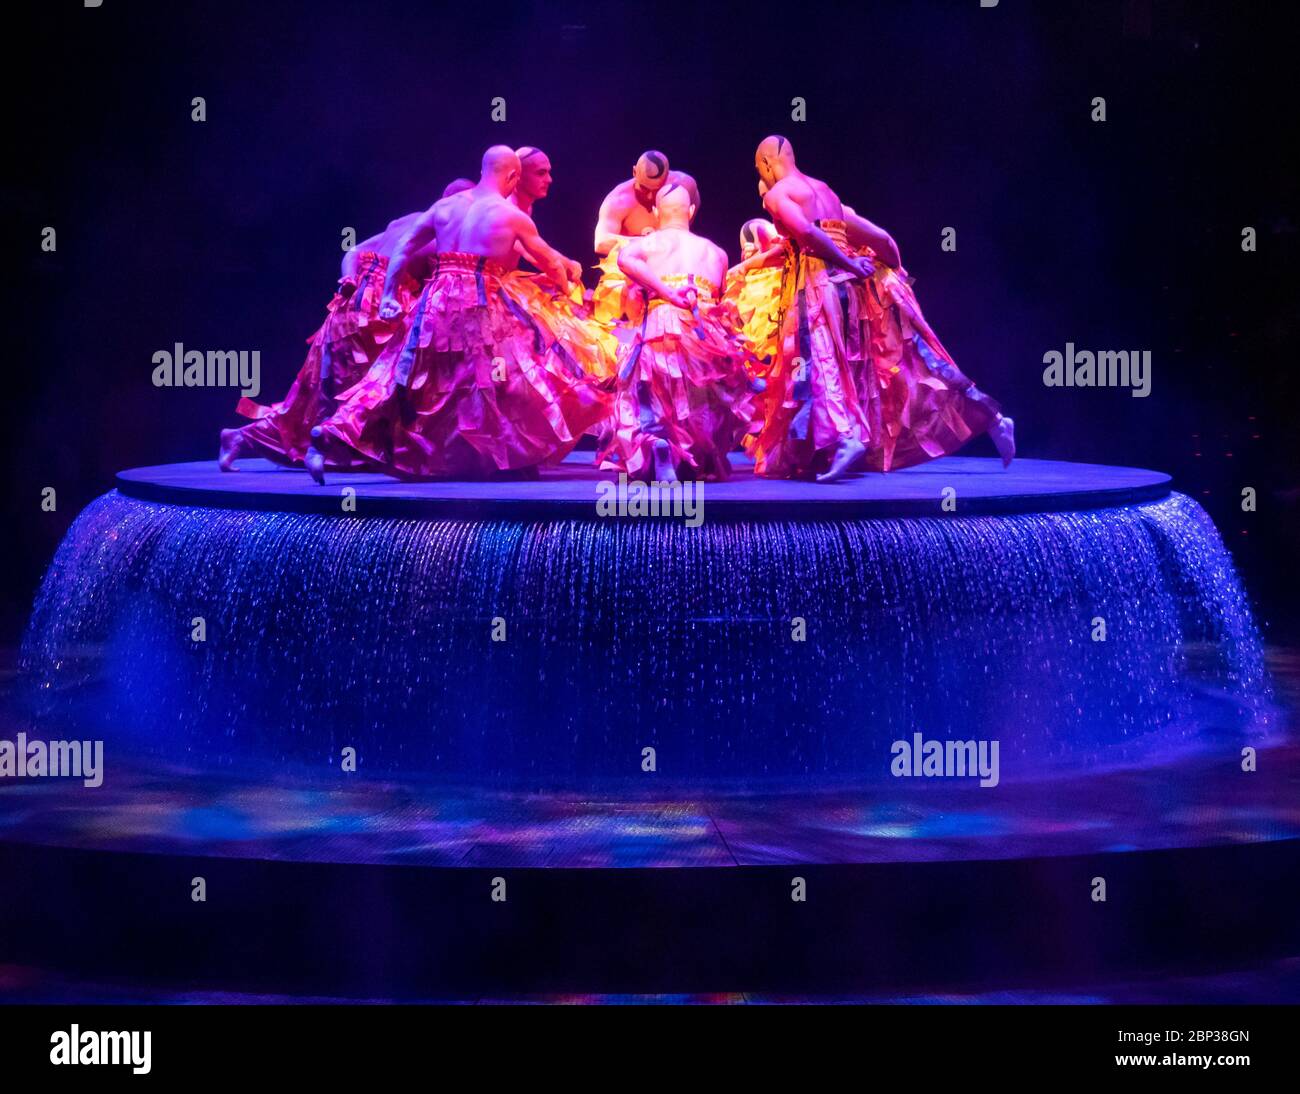 Le Reve-The Dream. A journey into the world of dreams to find true love. Wynn Resort and Casino, Las Vegas, Nevada, February 2020. Stock Photo